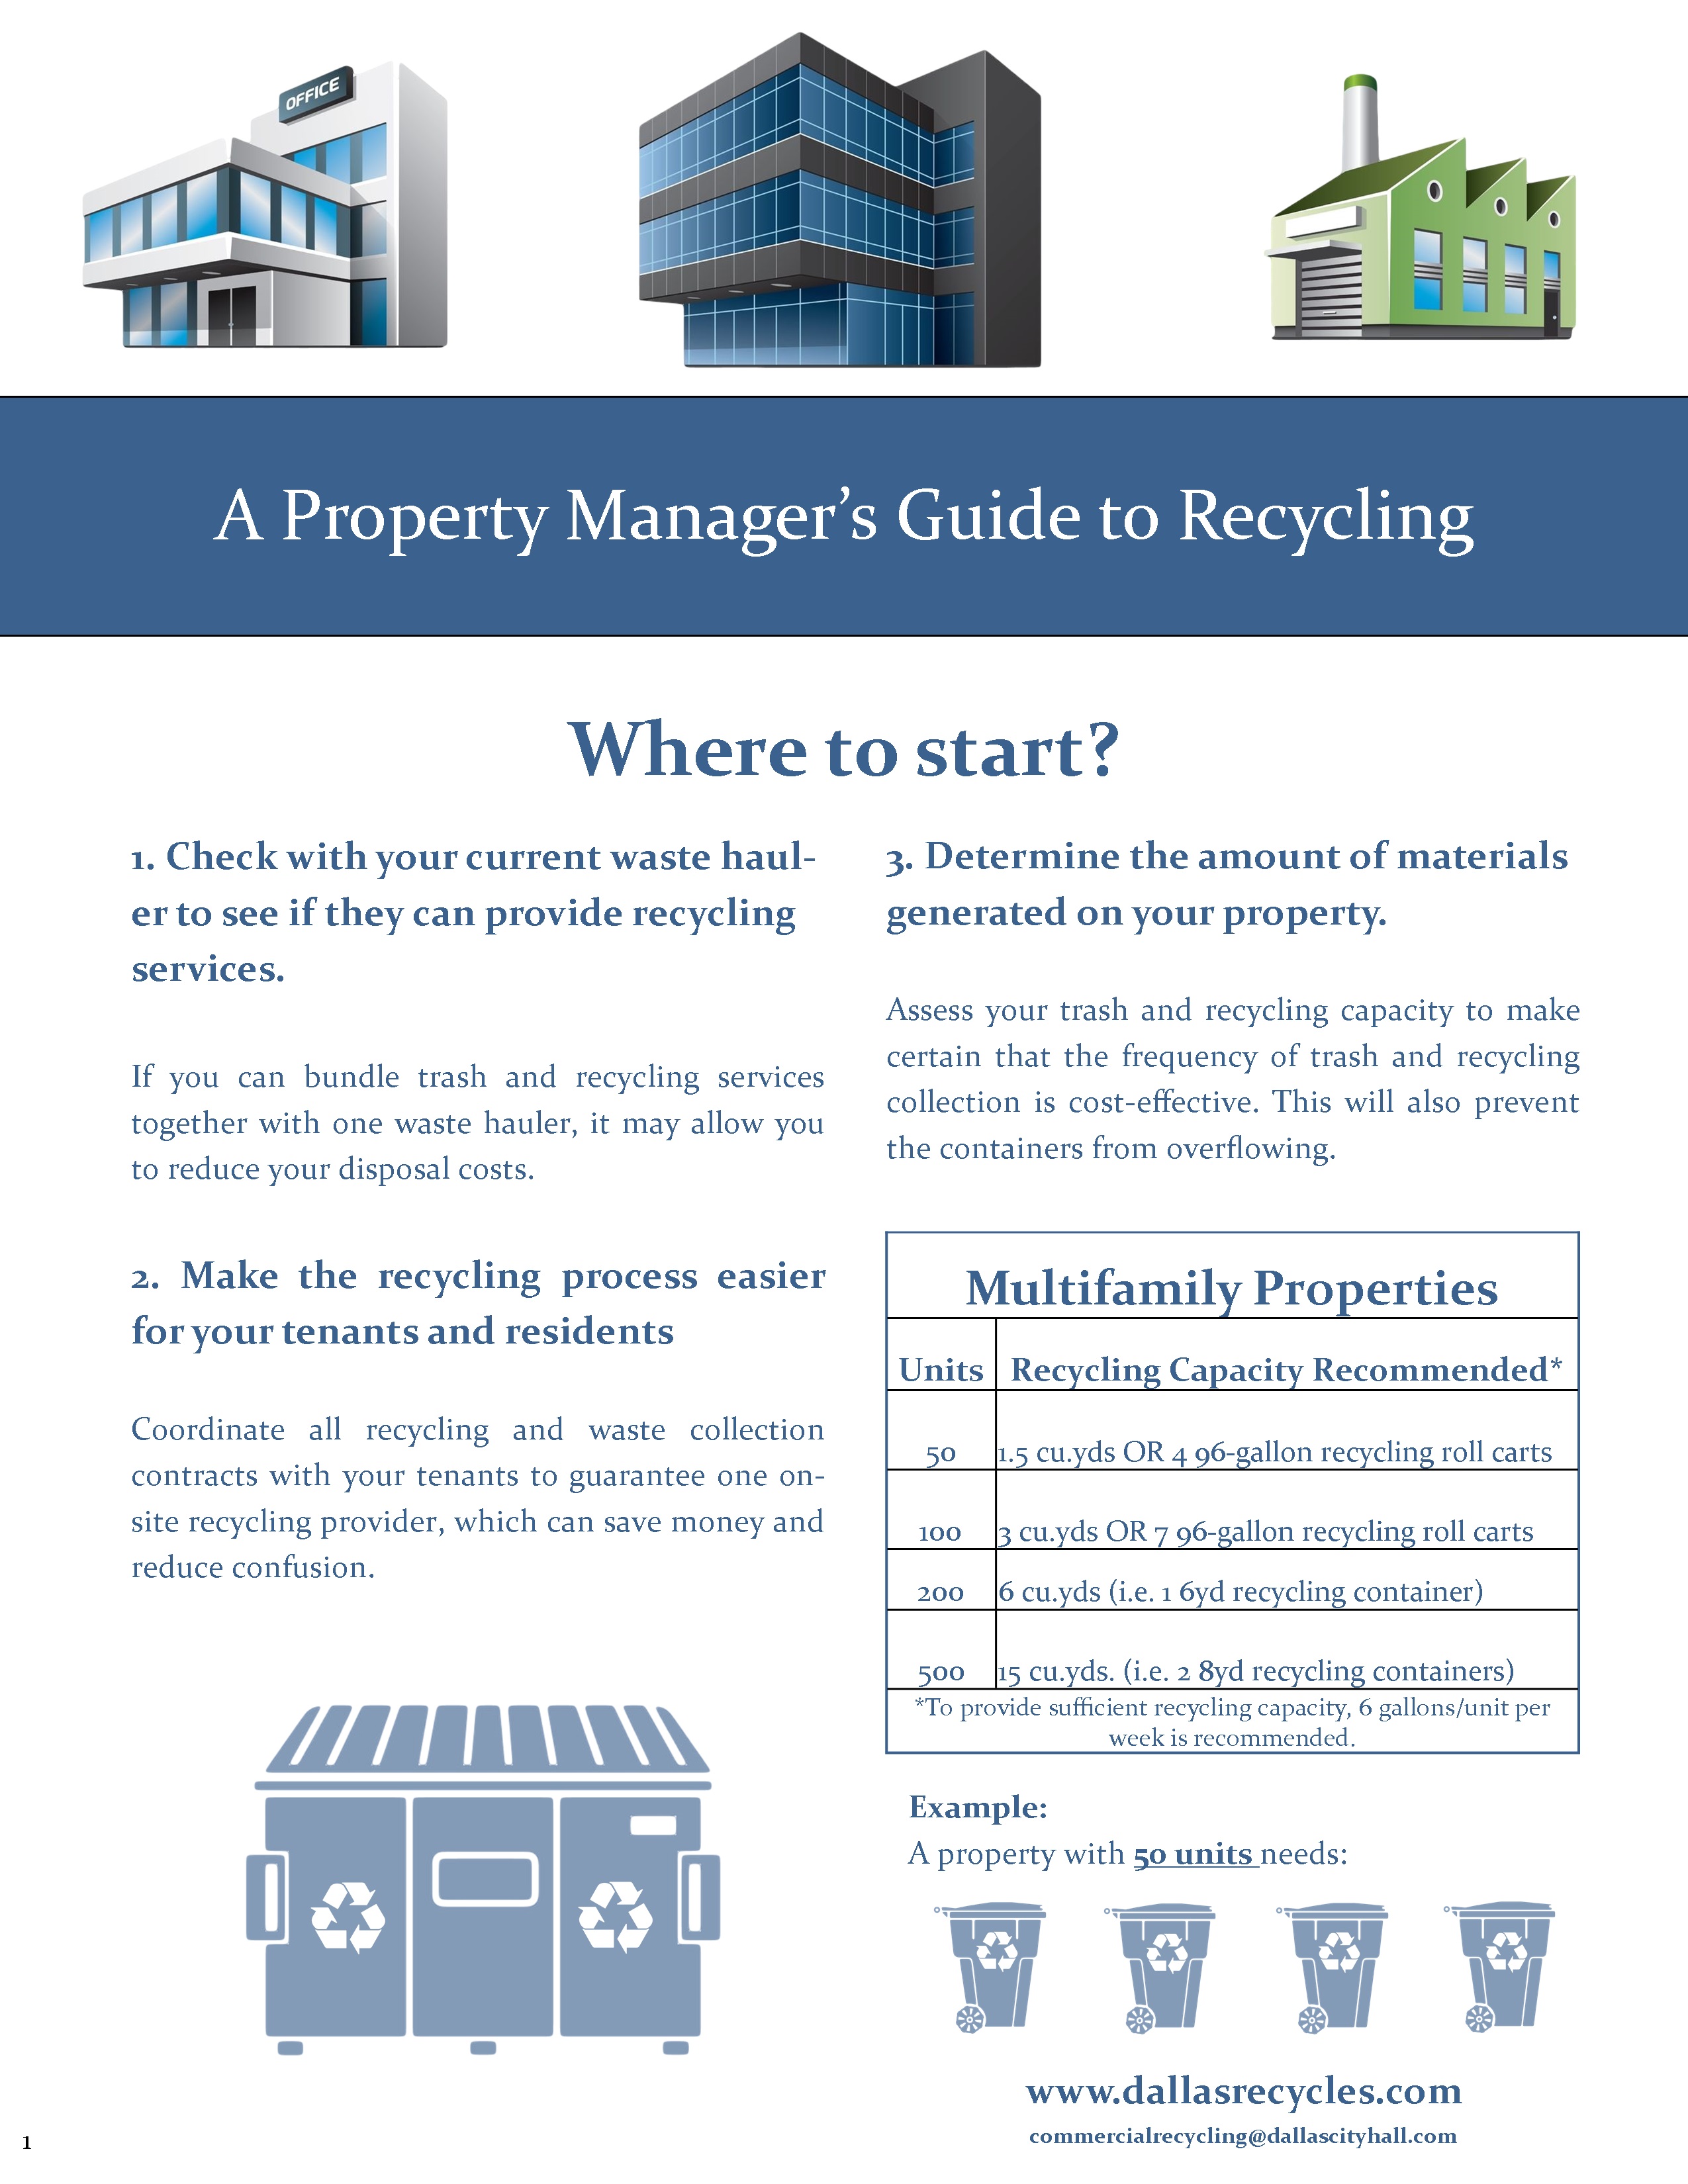 Property Manager's Guide - MFPs.jpg